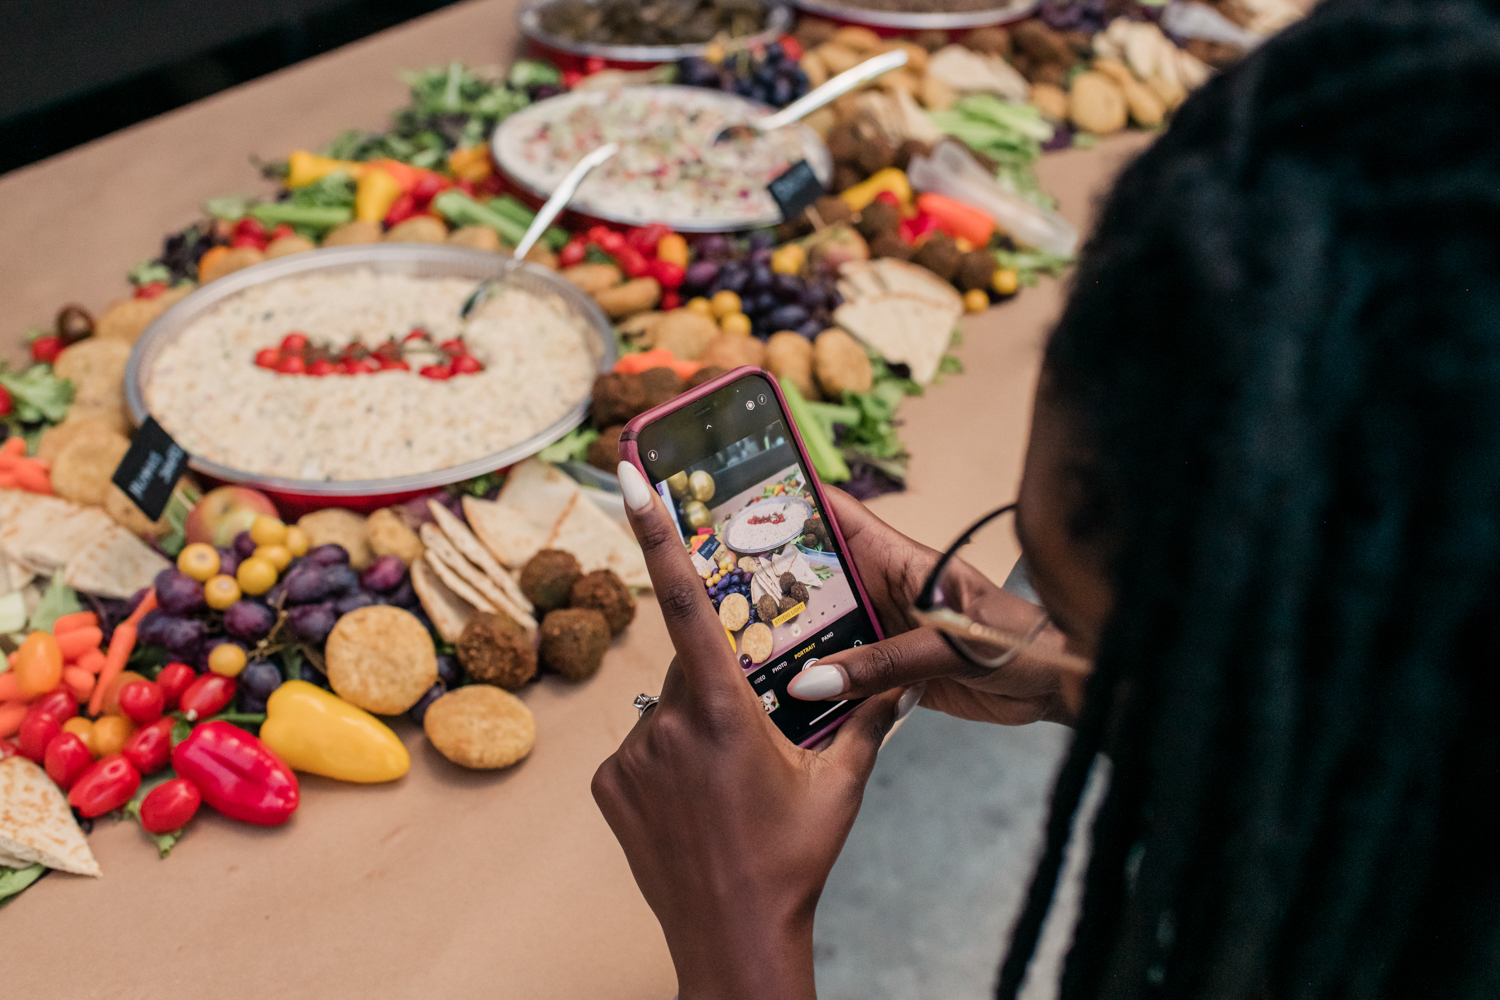 Koshary at r house plant based meals event photography for brands